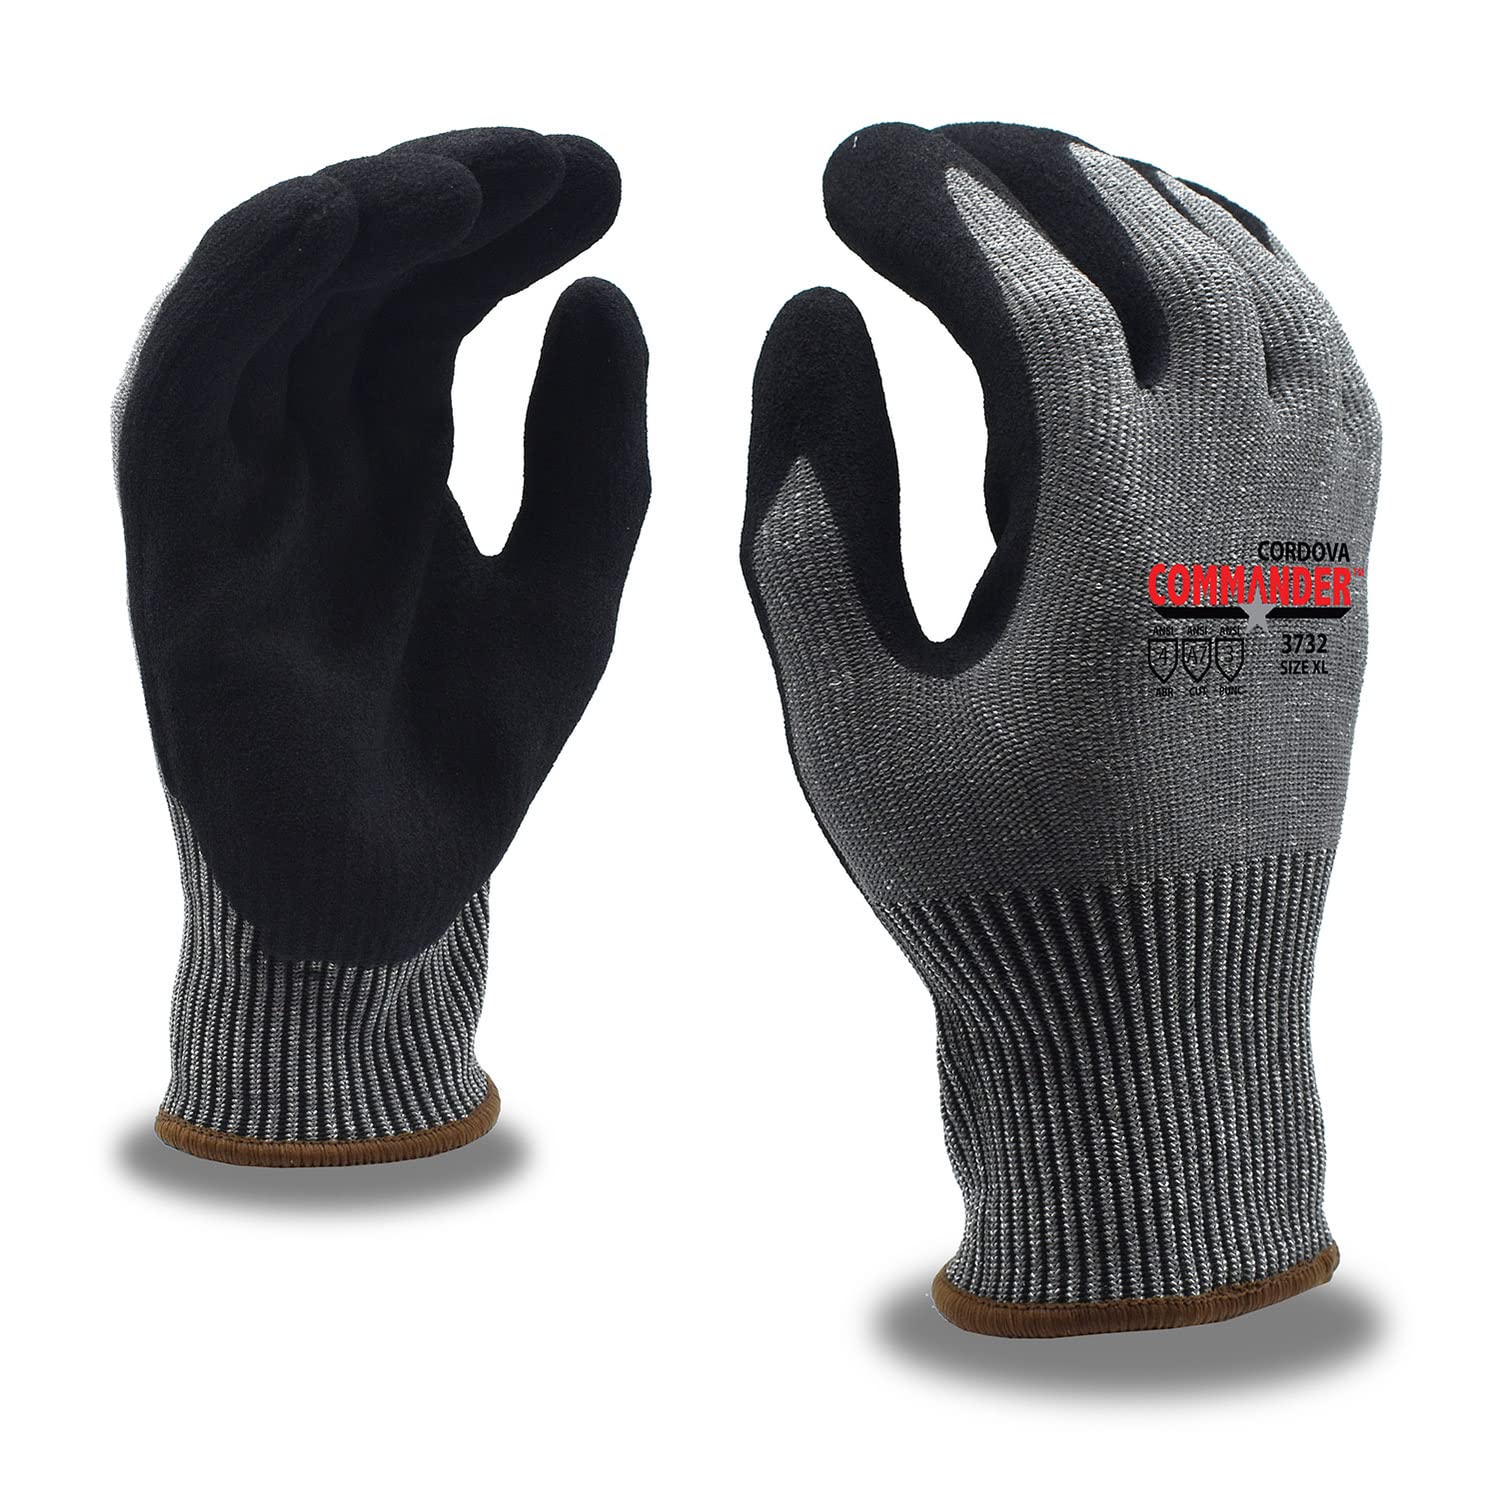 A pair of black anti cut gloves are on display